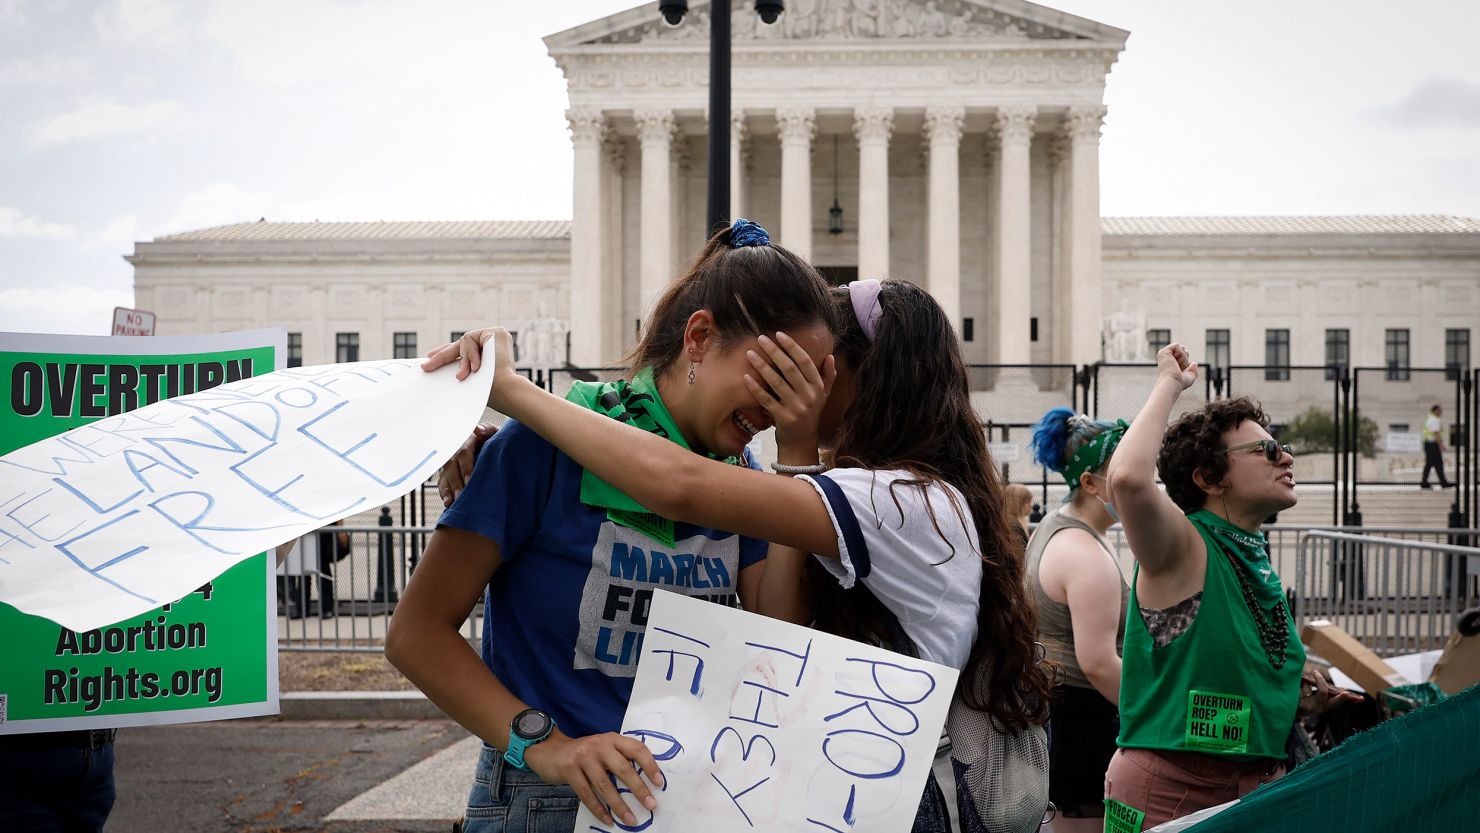 Activists react to the Dobbs v. Jackson Women's Health Organization ruling, which overturns the landmark abortion Roe v. Wade case, in front of the US Supreme Court on June 24, 2022, in Washington, DC.   (Photo by Anna Moneymaker/Getty Images)